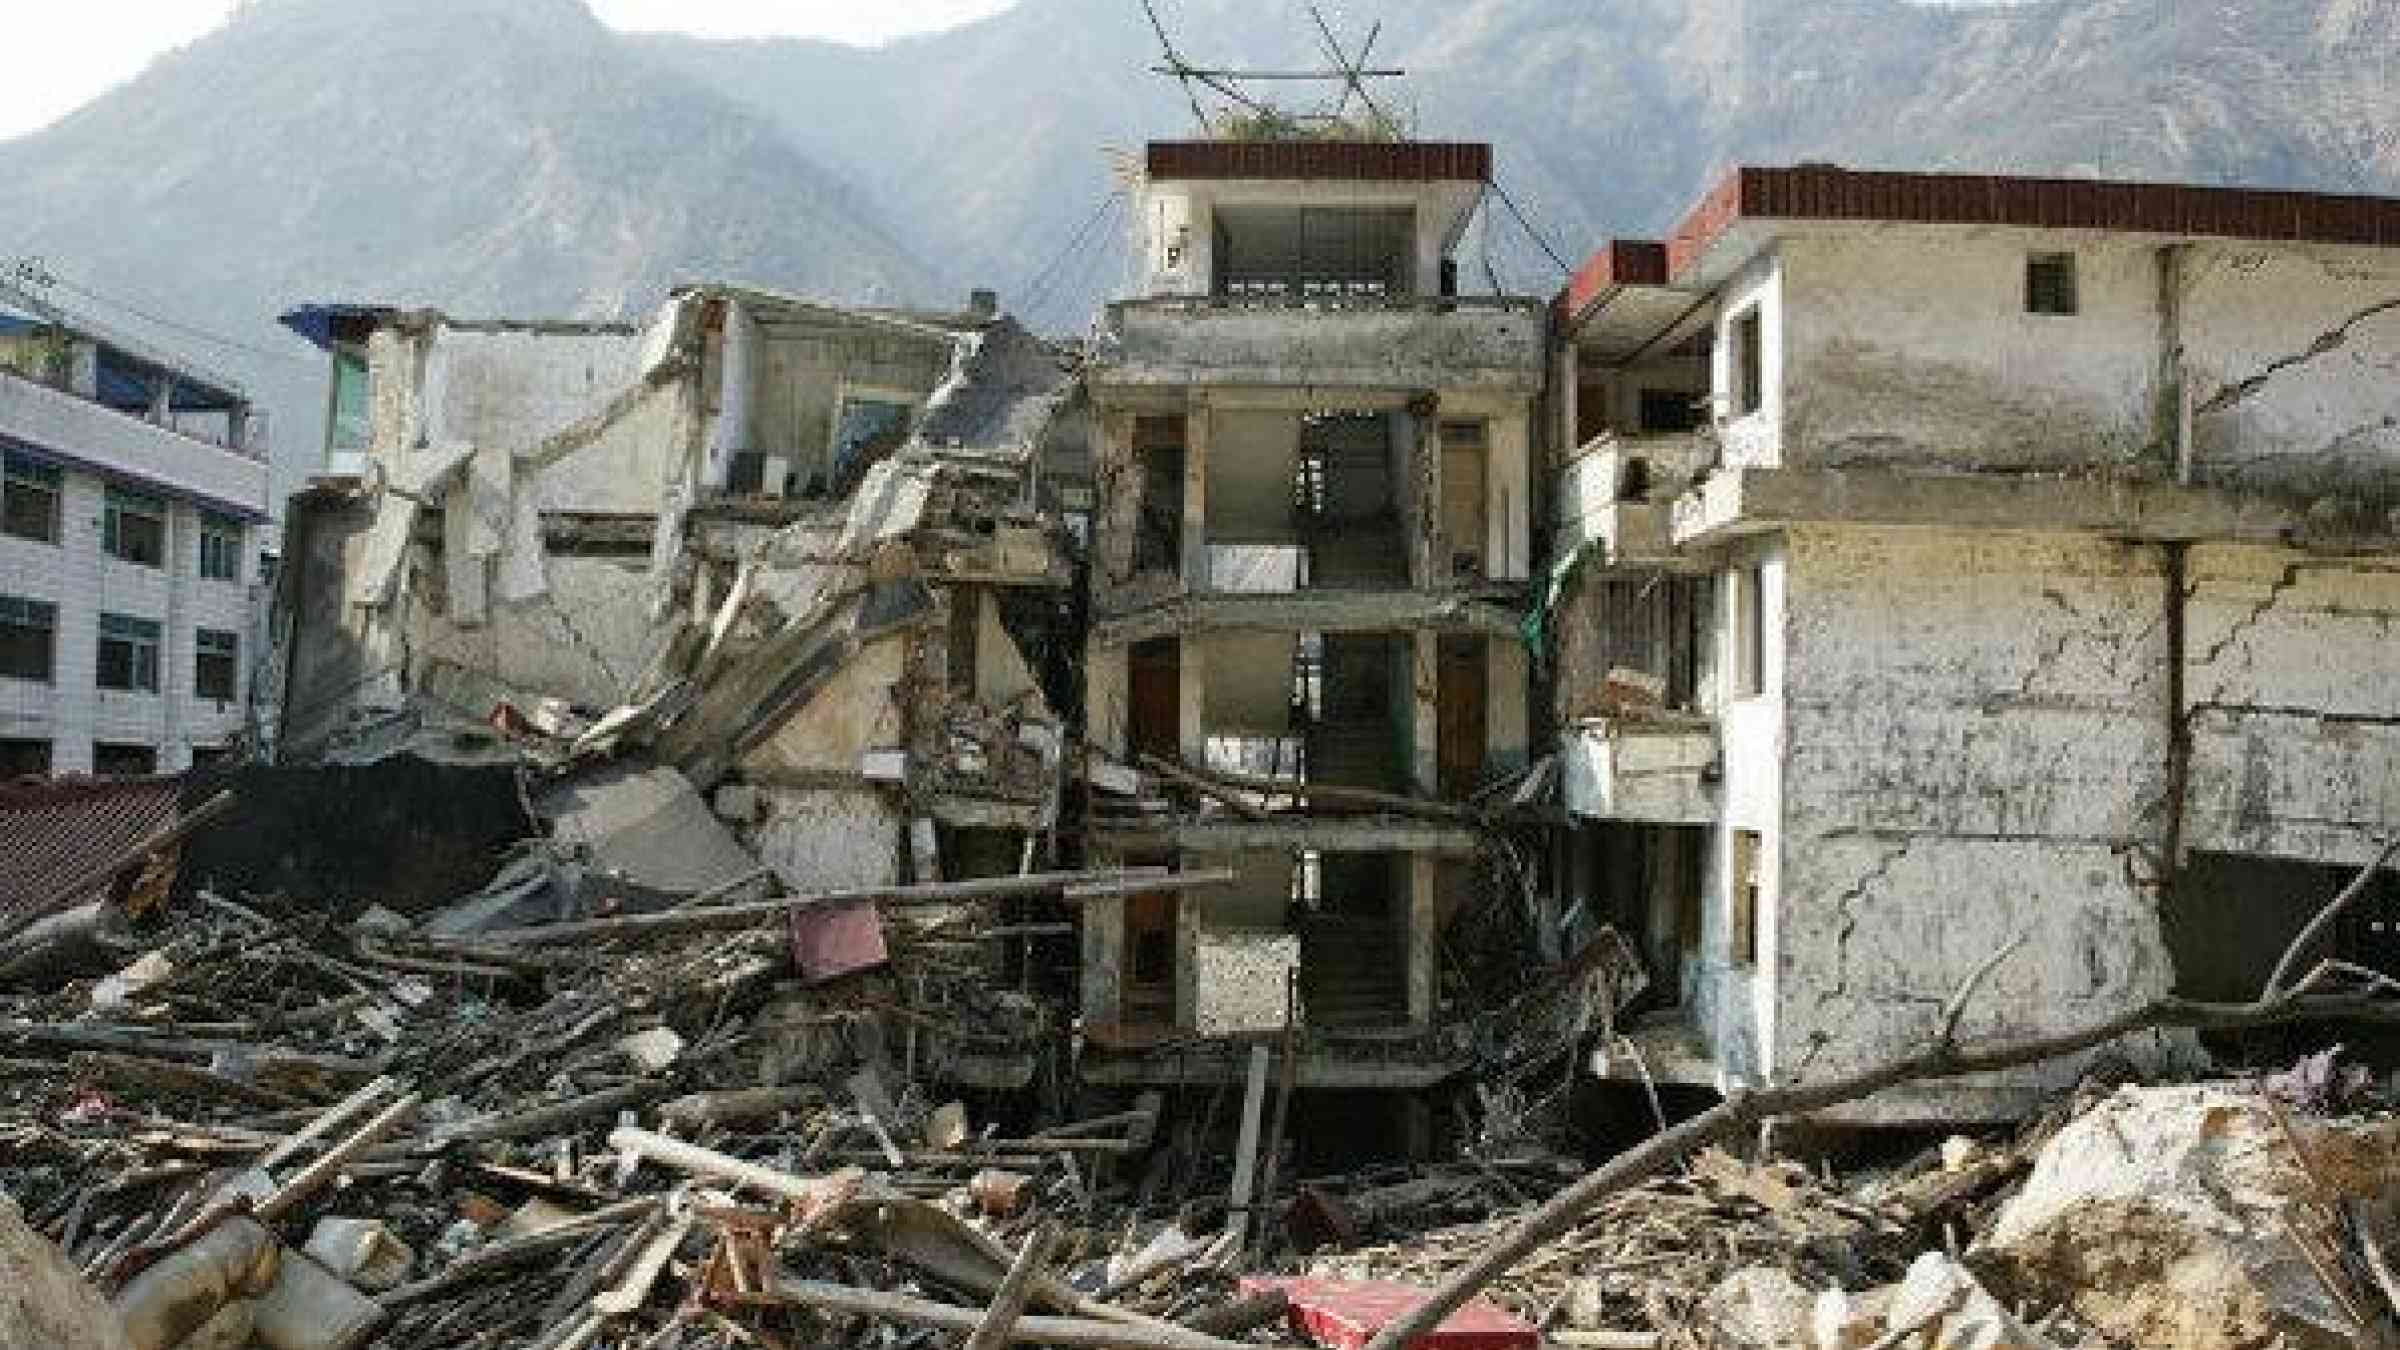 Nepal is one of the most earthquake-prone countries in the world